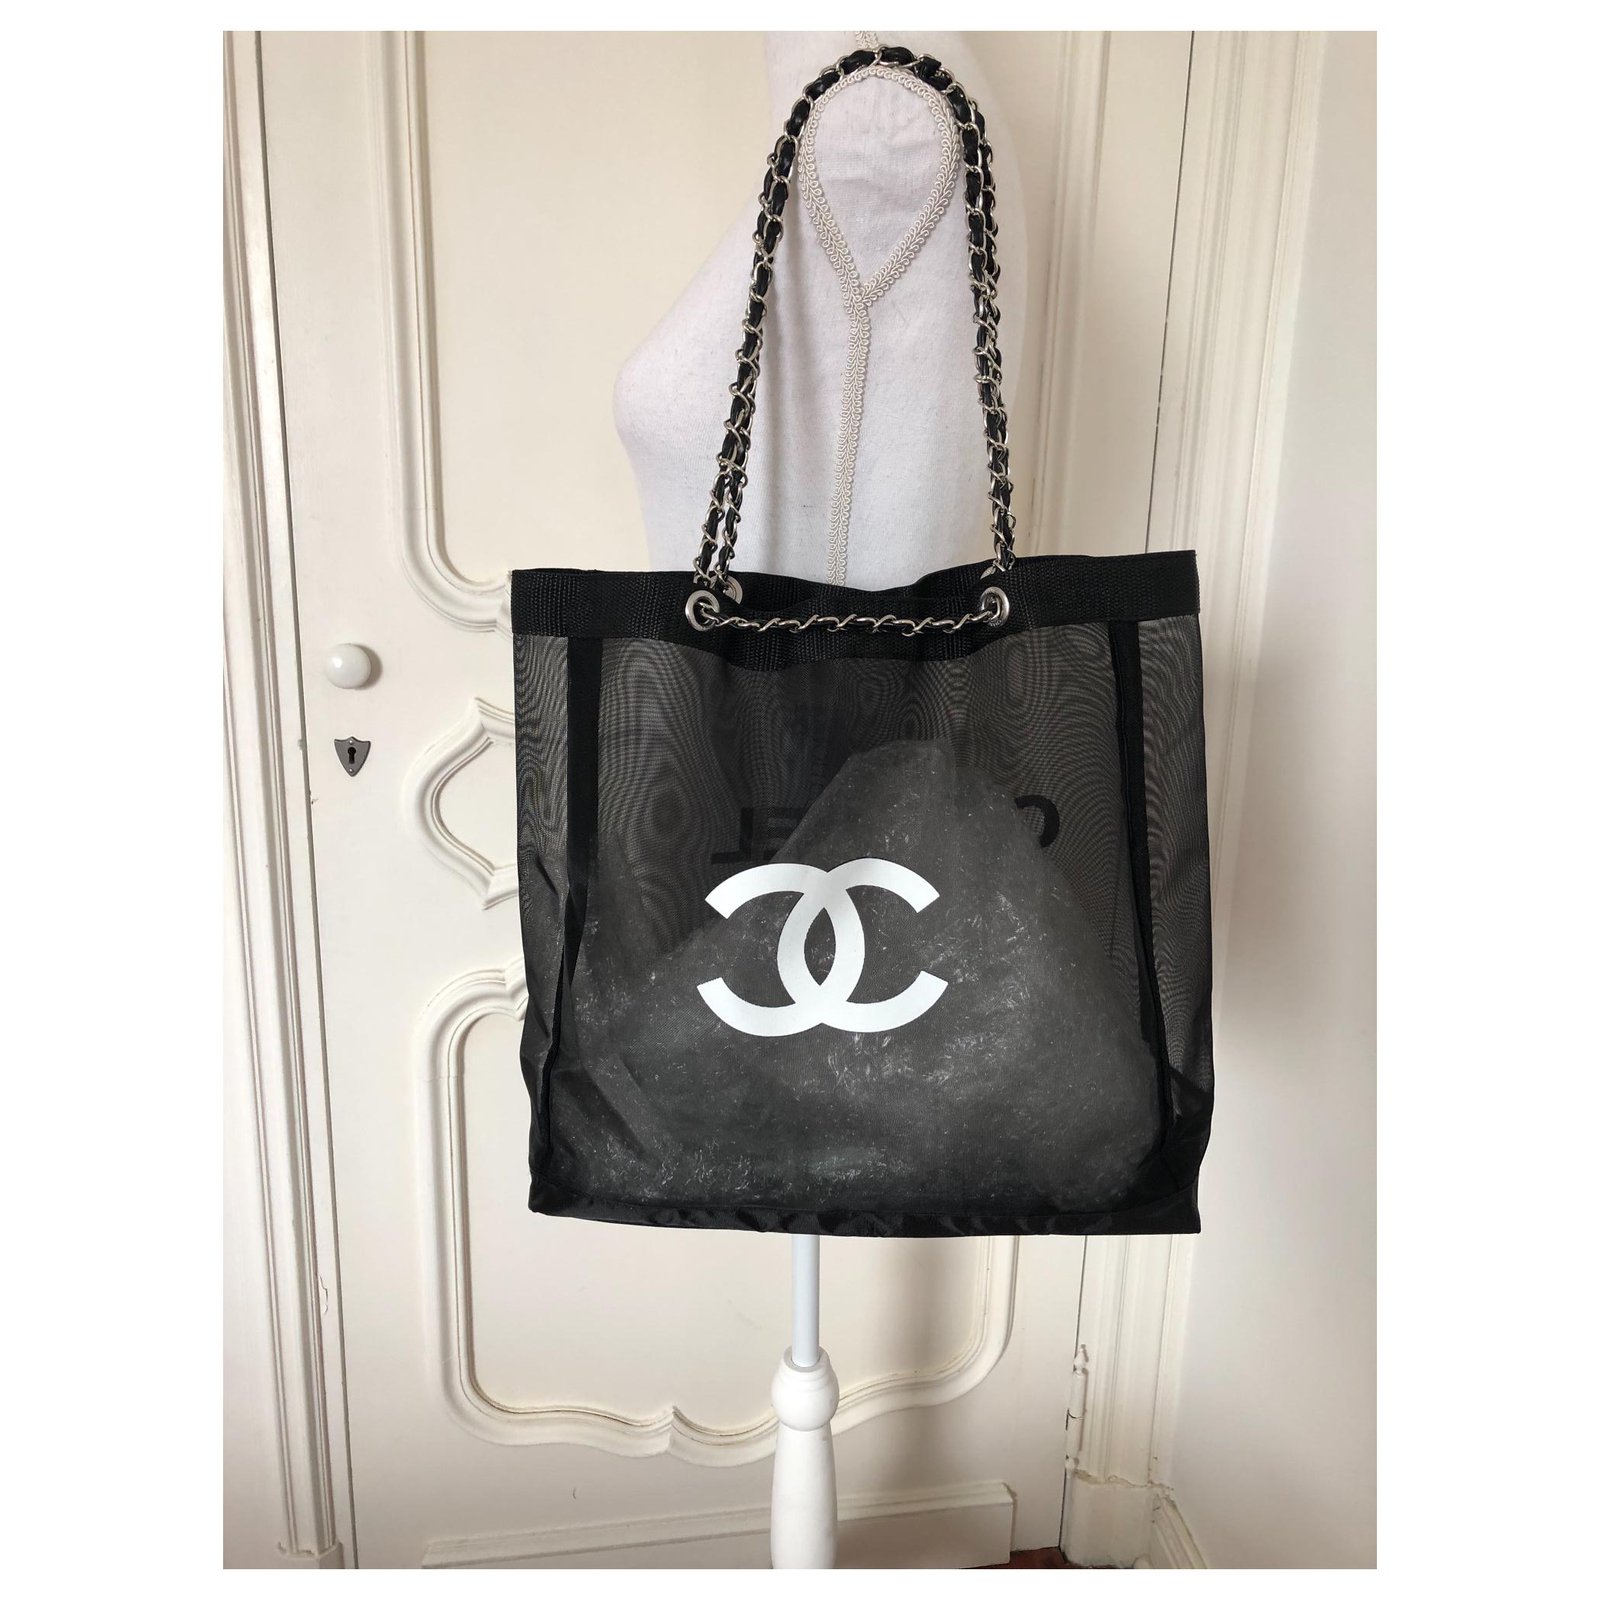 Transparent Chanel Tote Bag with Silver Hardware